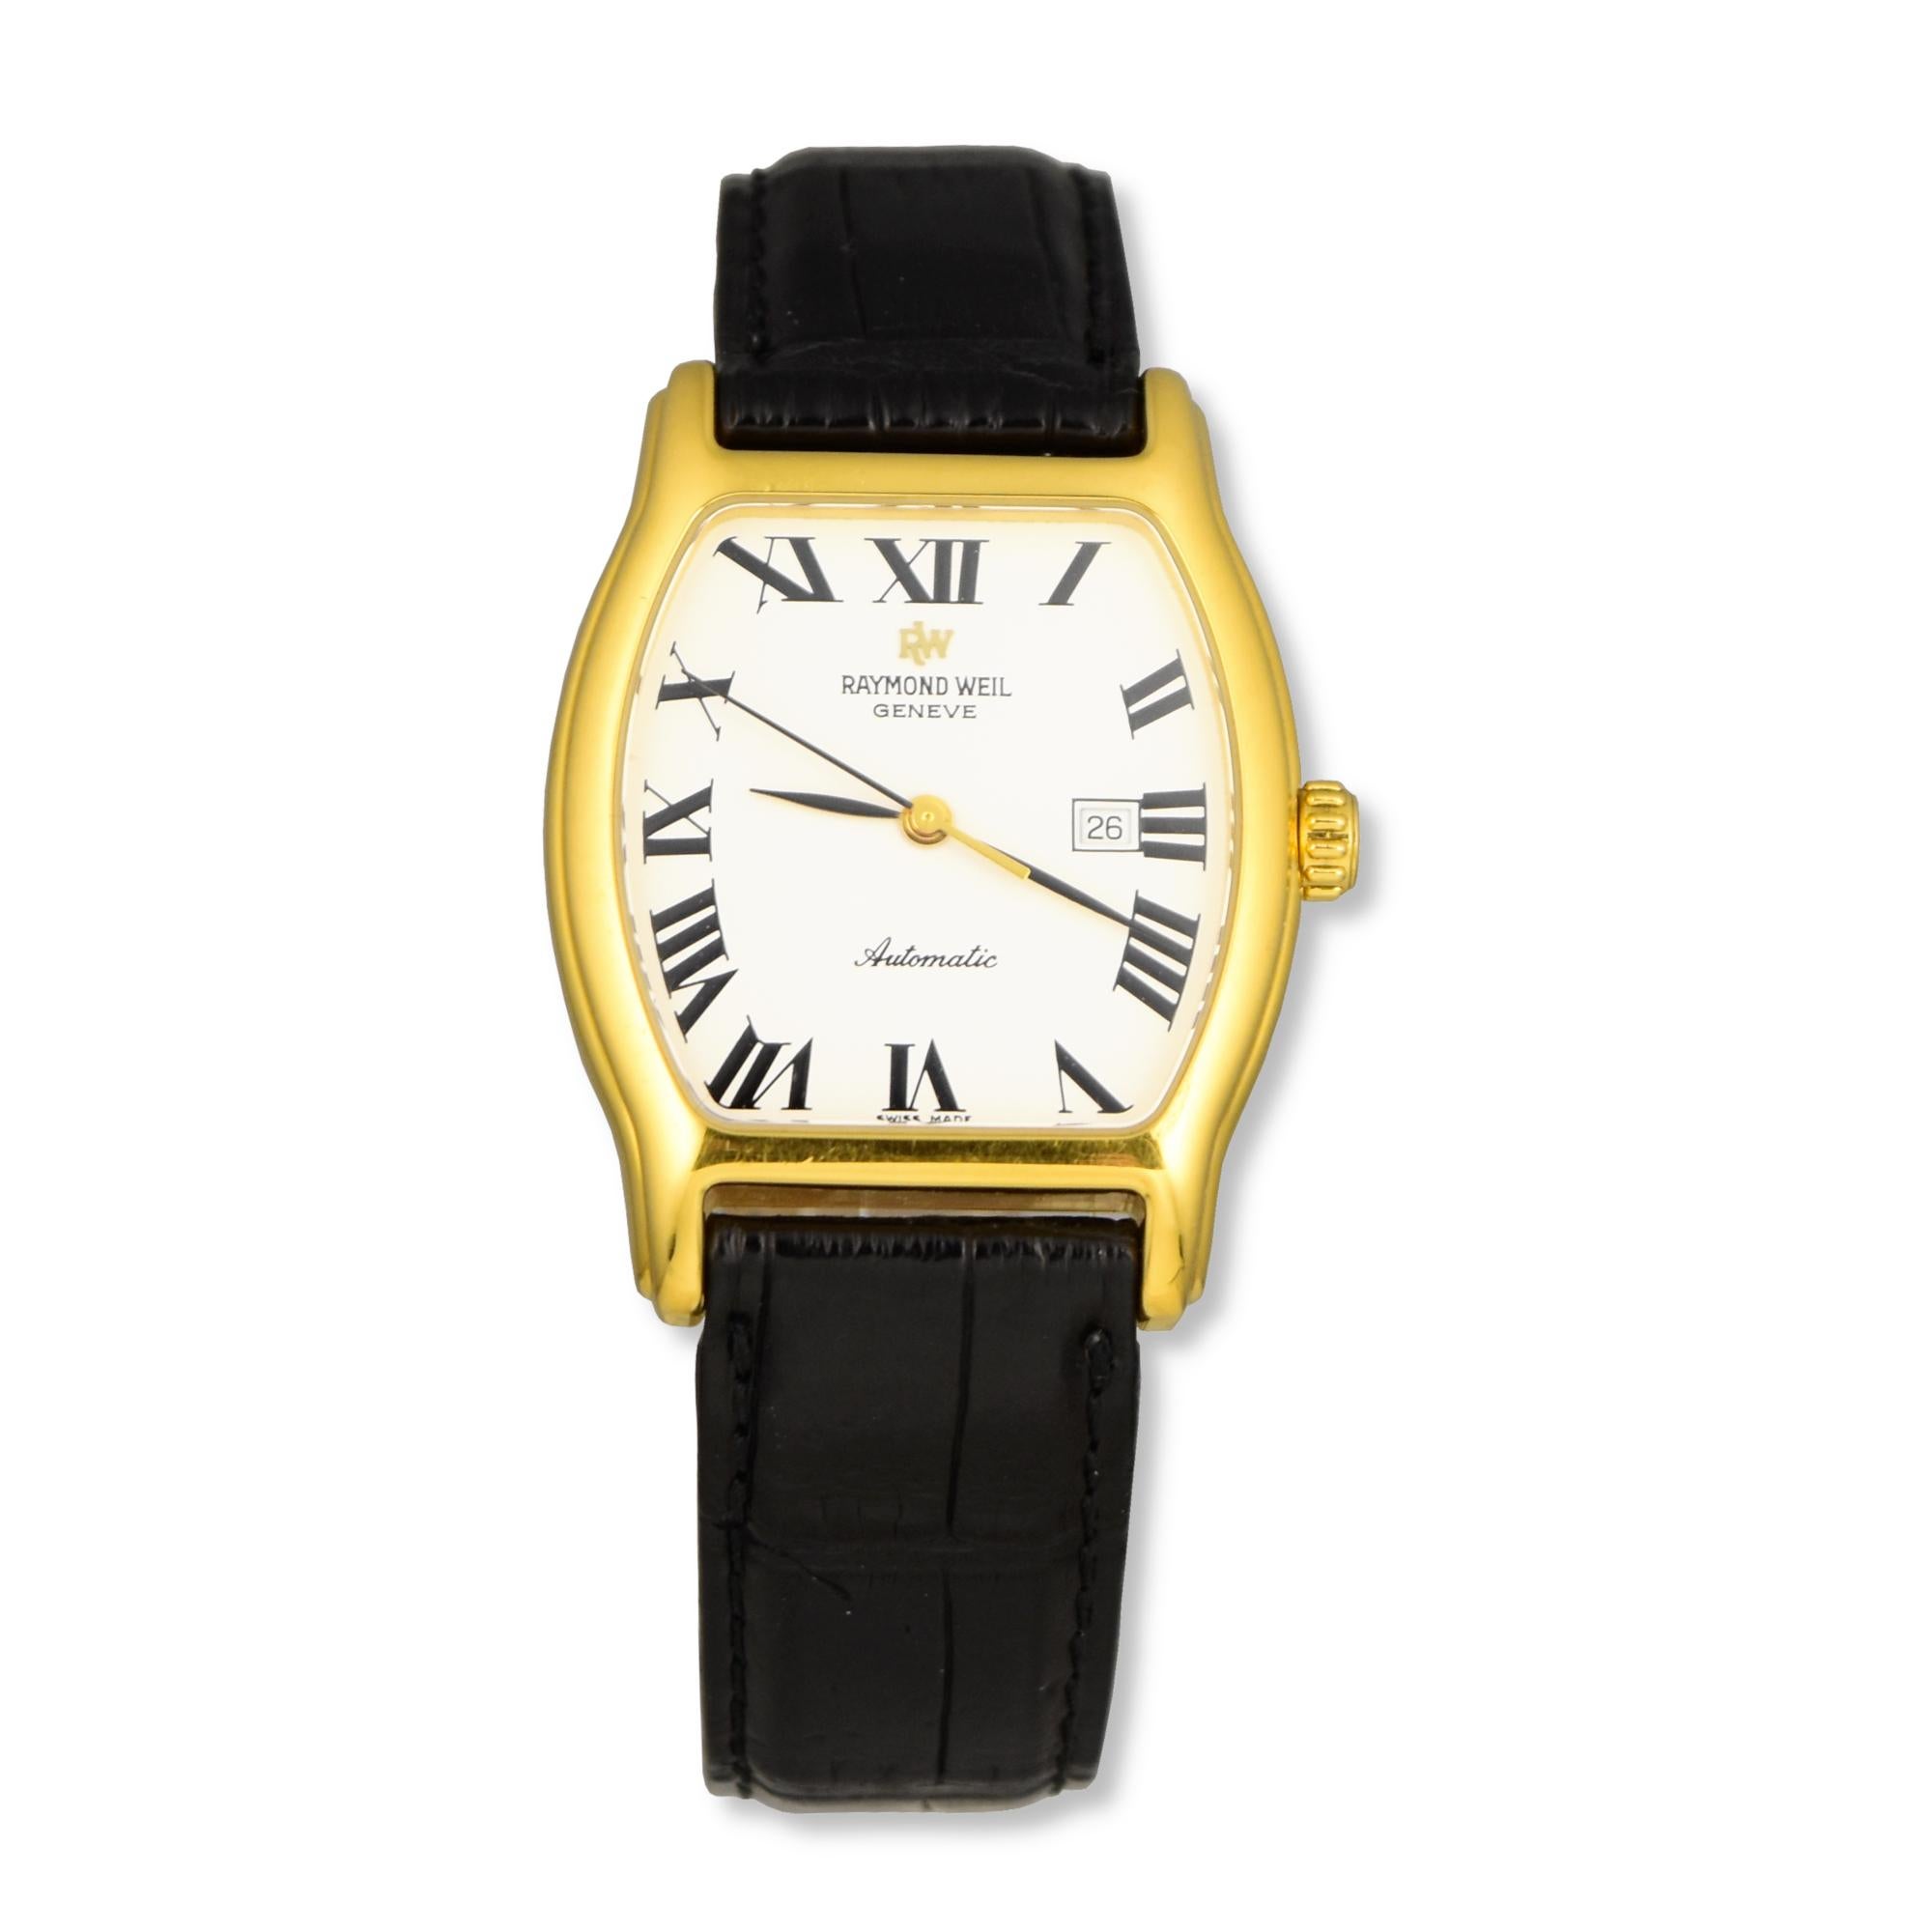 Brand: Raymond Weil
Model: Tradition Mecanique
Ref: 2020 2156768
Case Shape:  Oval 
Case Diameter: 31 mm
DIal Color: White
Movement: Automatic
Case Material: 18k Electroplated Yellow Gold
Bracelet Material: Leather Strap 
Functions: Date, Hour,